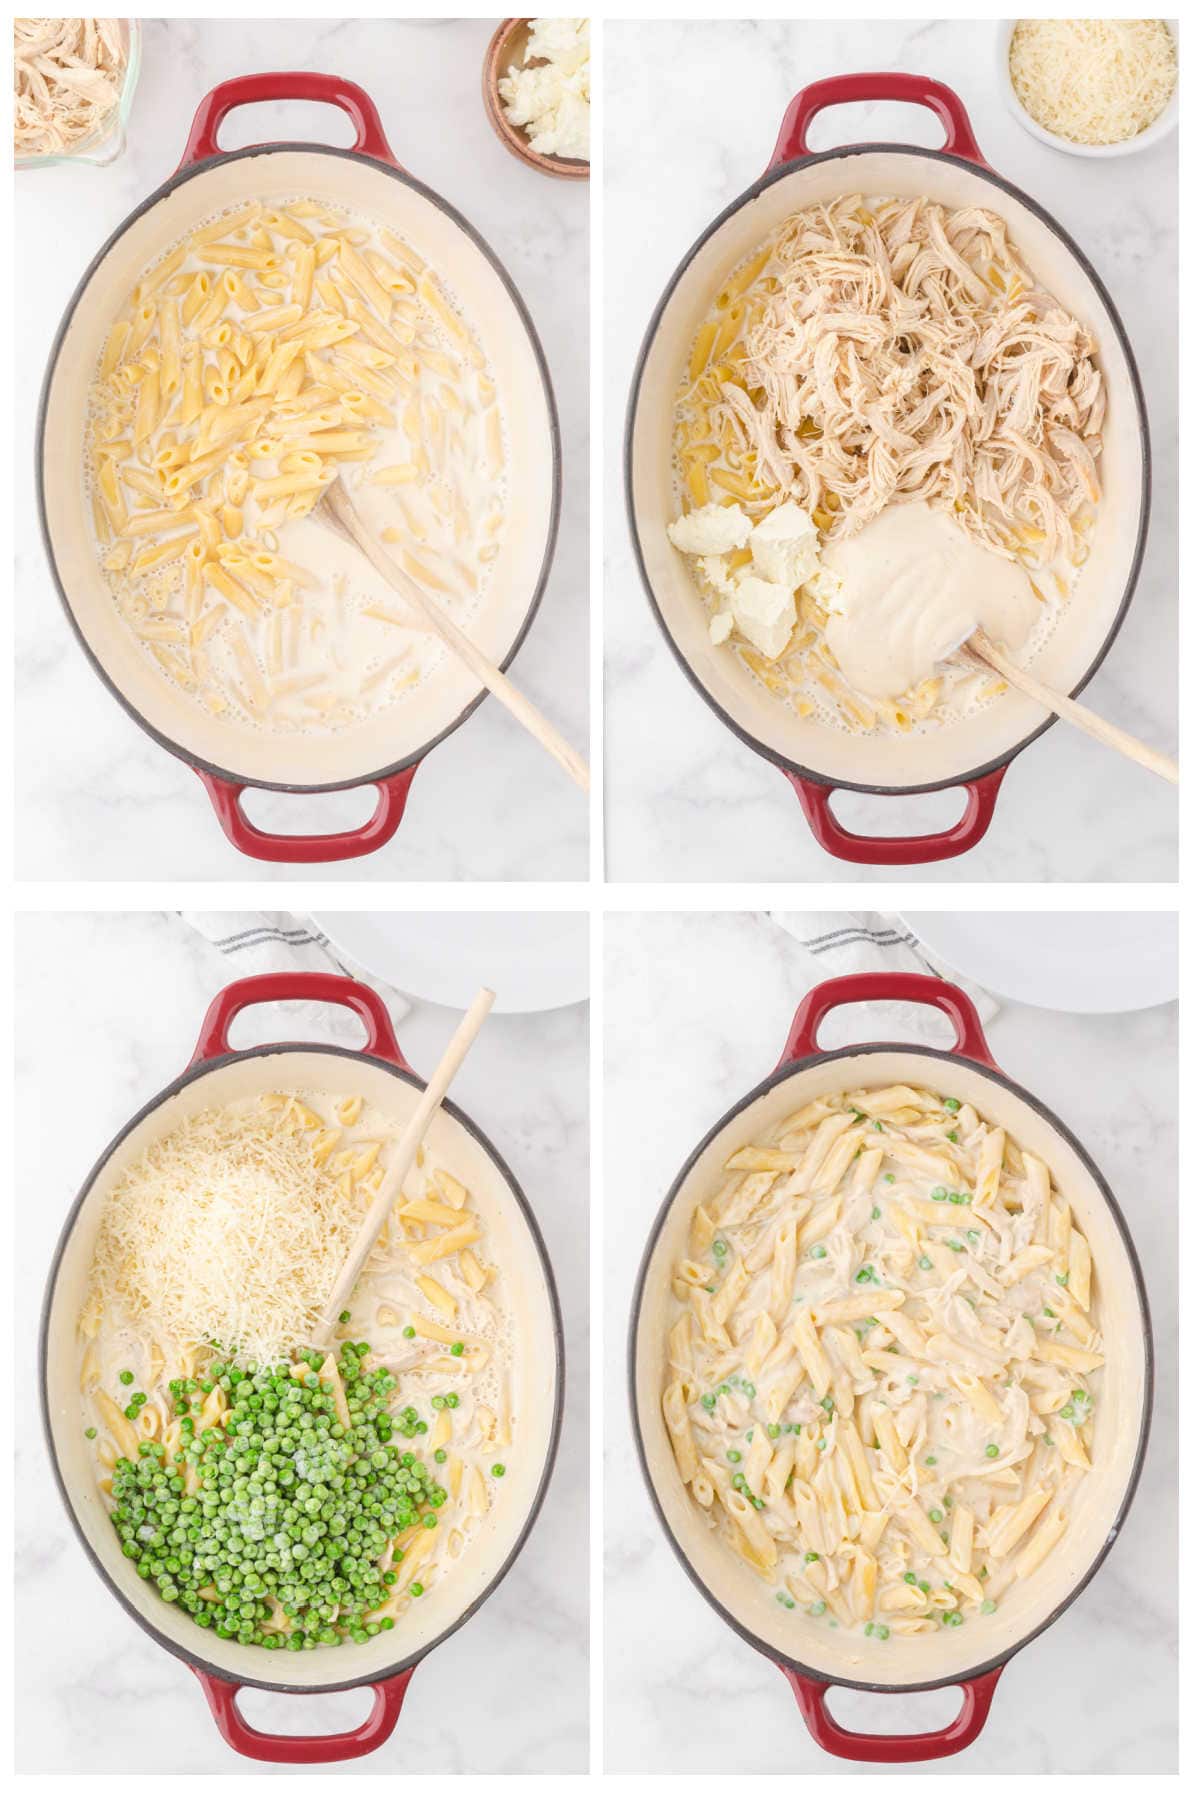 Step by step images showing how to make this pasta.